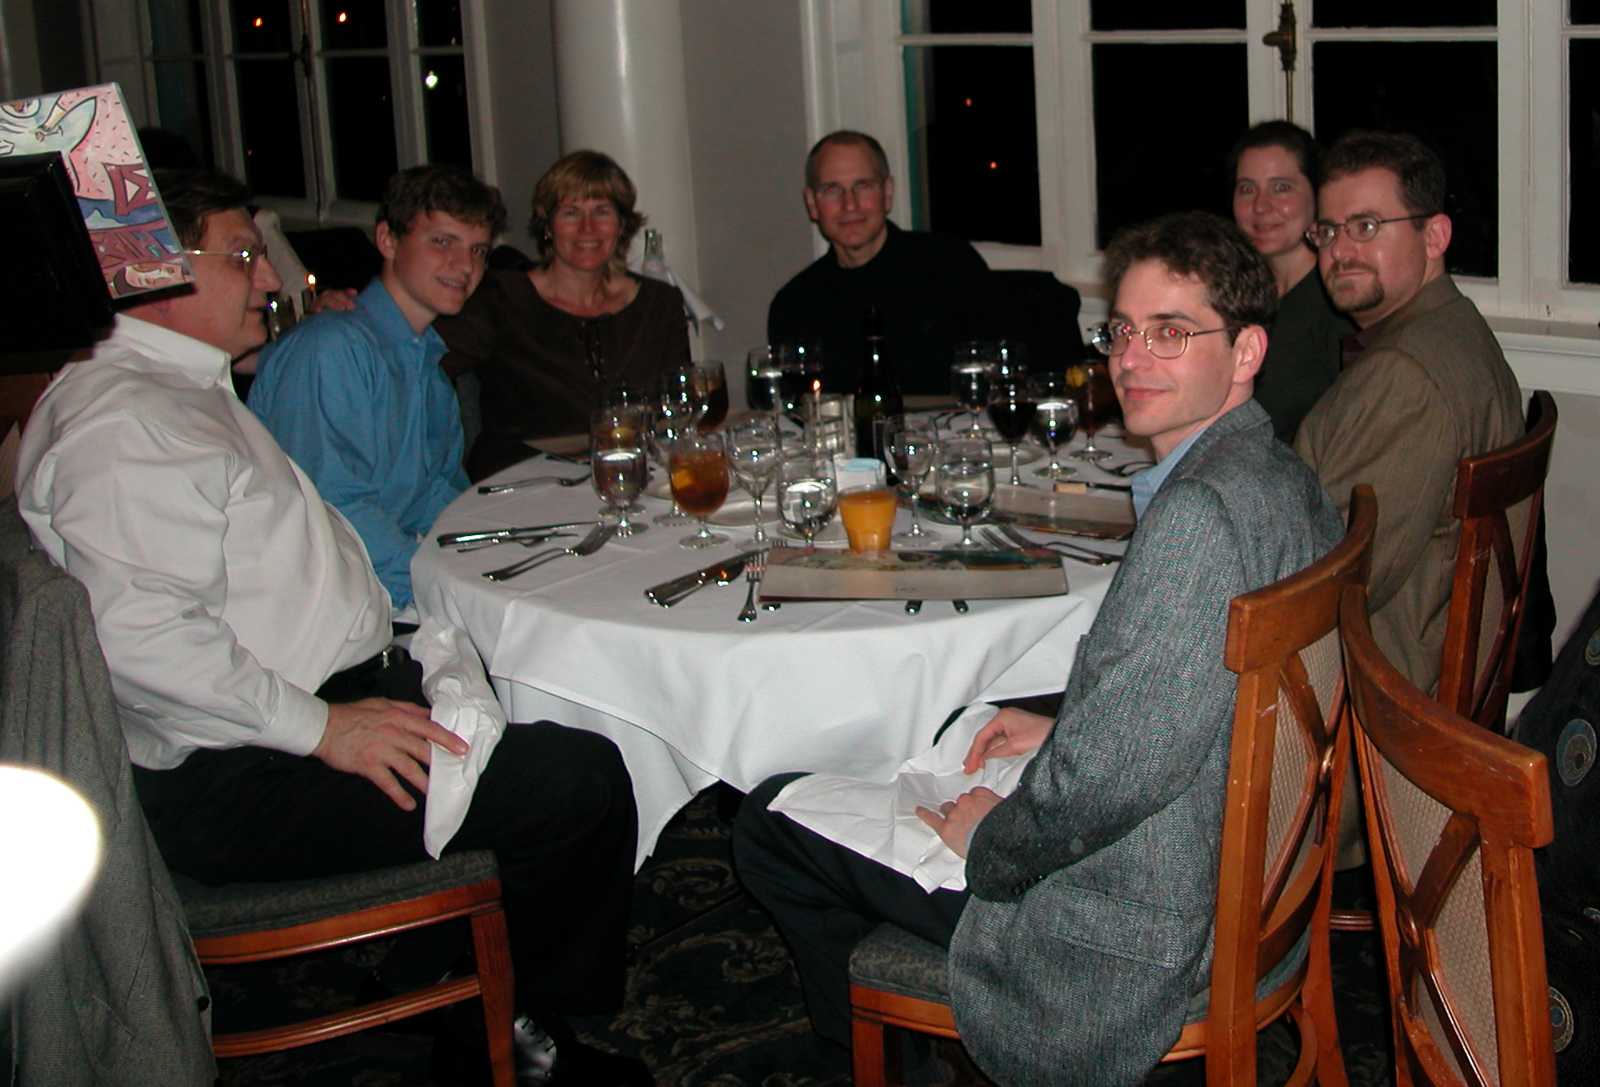 Larry and his son Paul, Stephanie, Marc, Dan, Jackie and Steve at BELLA LUNA® restaurant in New Orleans